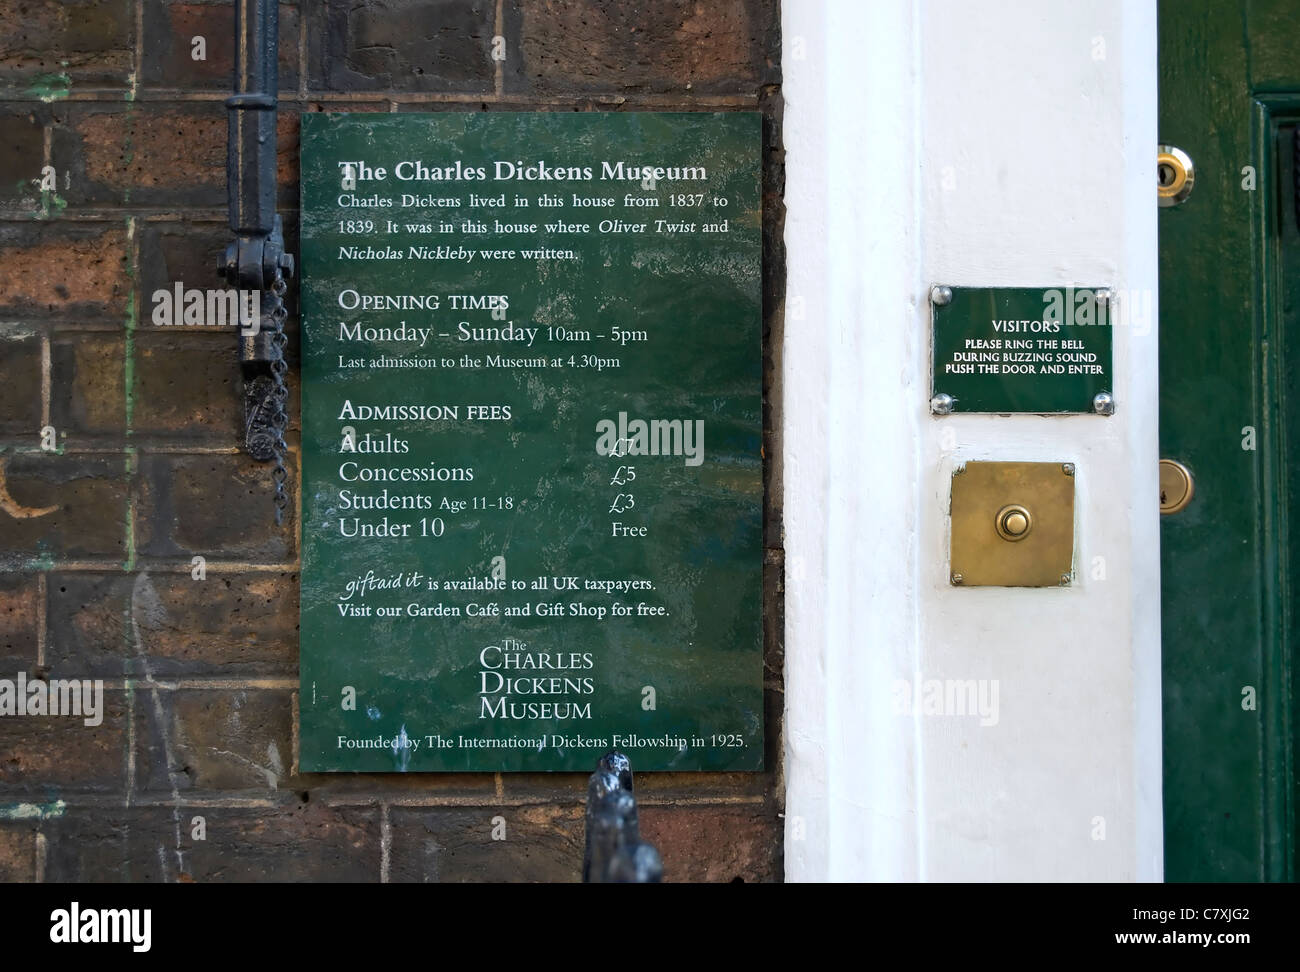 entrance with opening times and admission fees at the charles dickens museum, doughty street, london, england Stock Photo